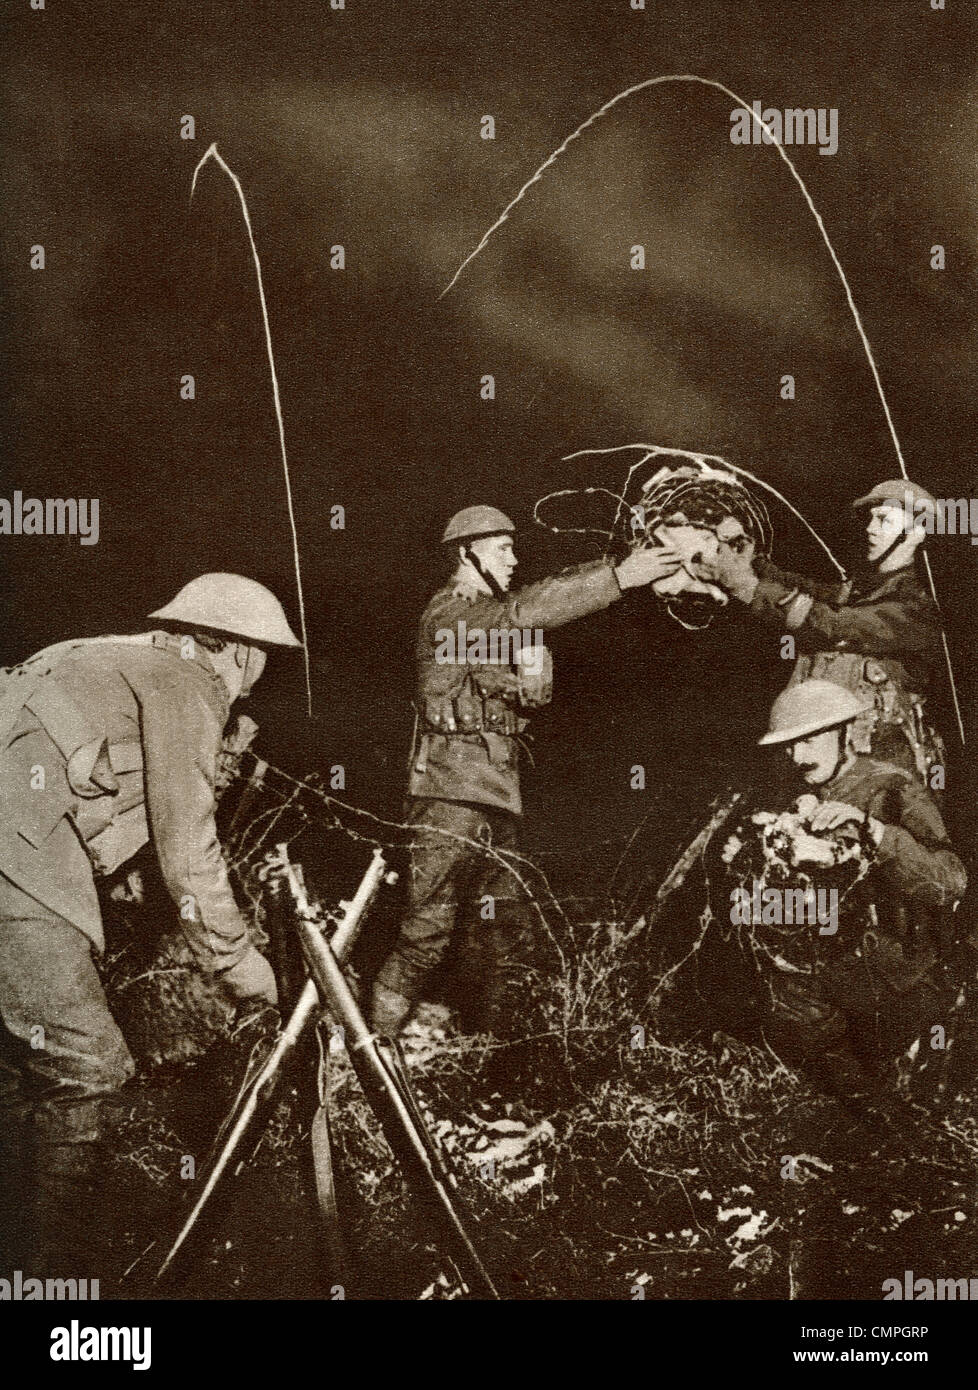 A wiring party. Soldiers erecting barbed wire entanglements in No Man's Land under cover of darkness during World War One. Stock Photo